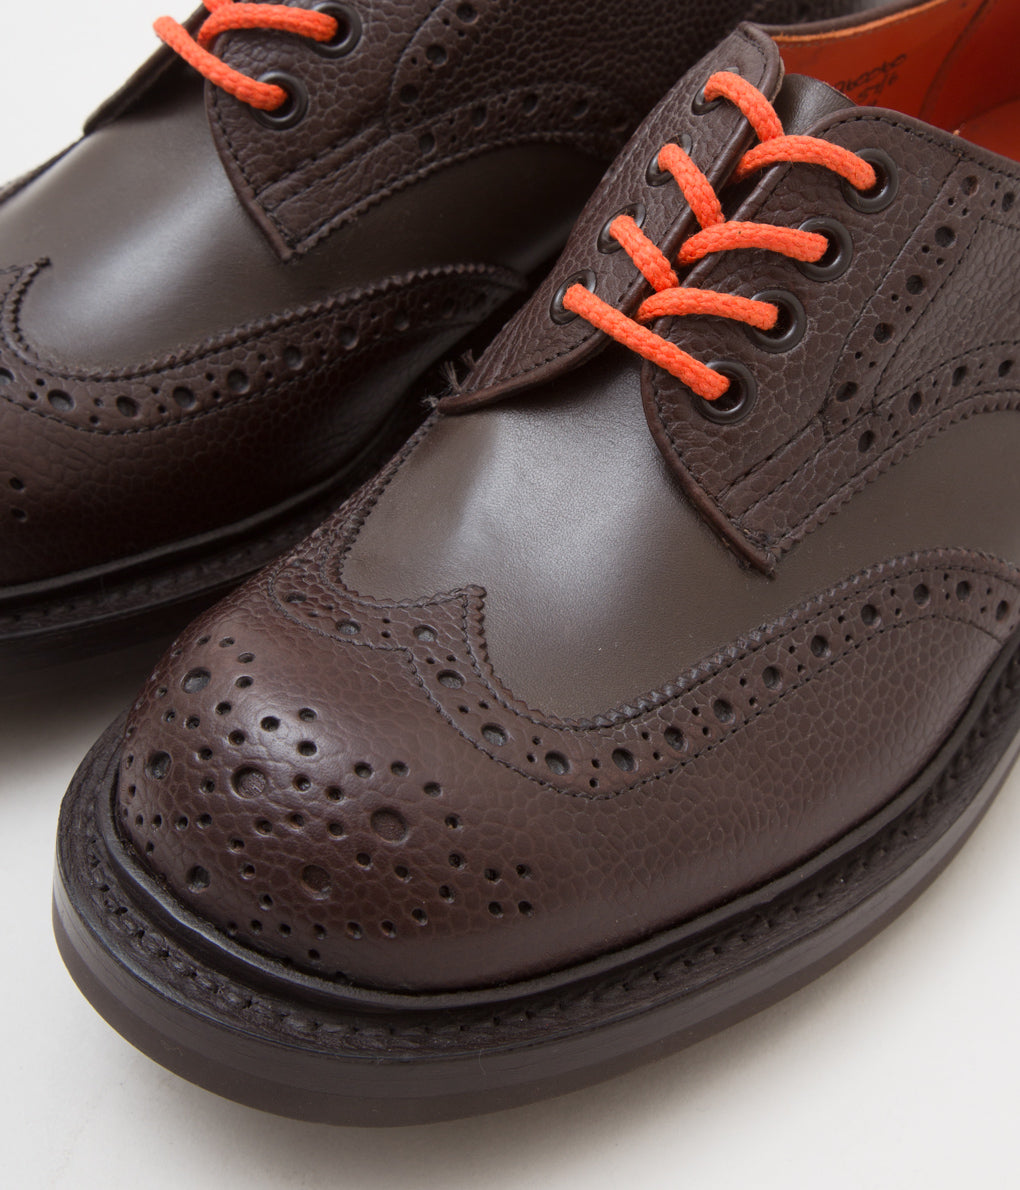 QUILP BY TRICKER'S×MAIDENS SHOP "M7457 OXFORD SHOE" (DK BROWN MULTI)